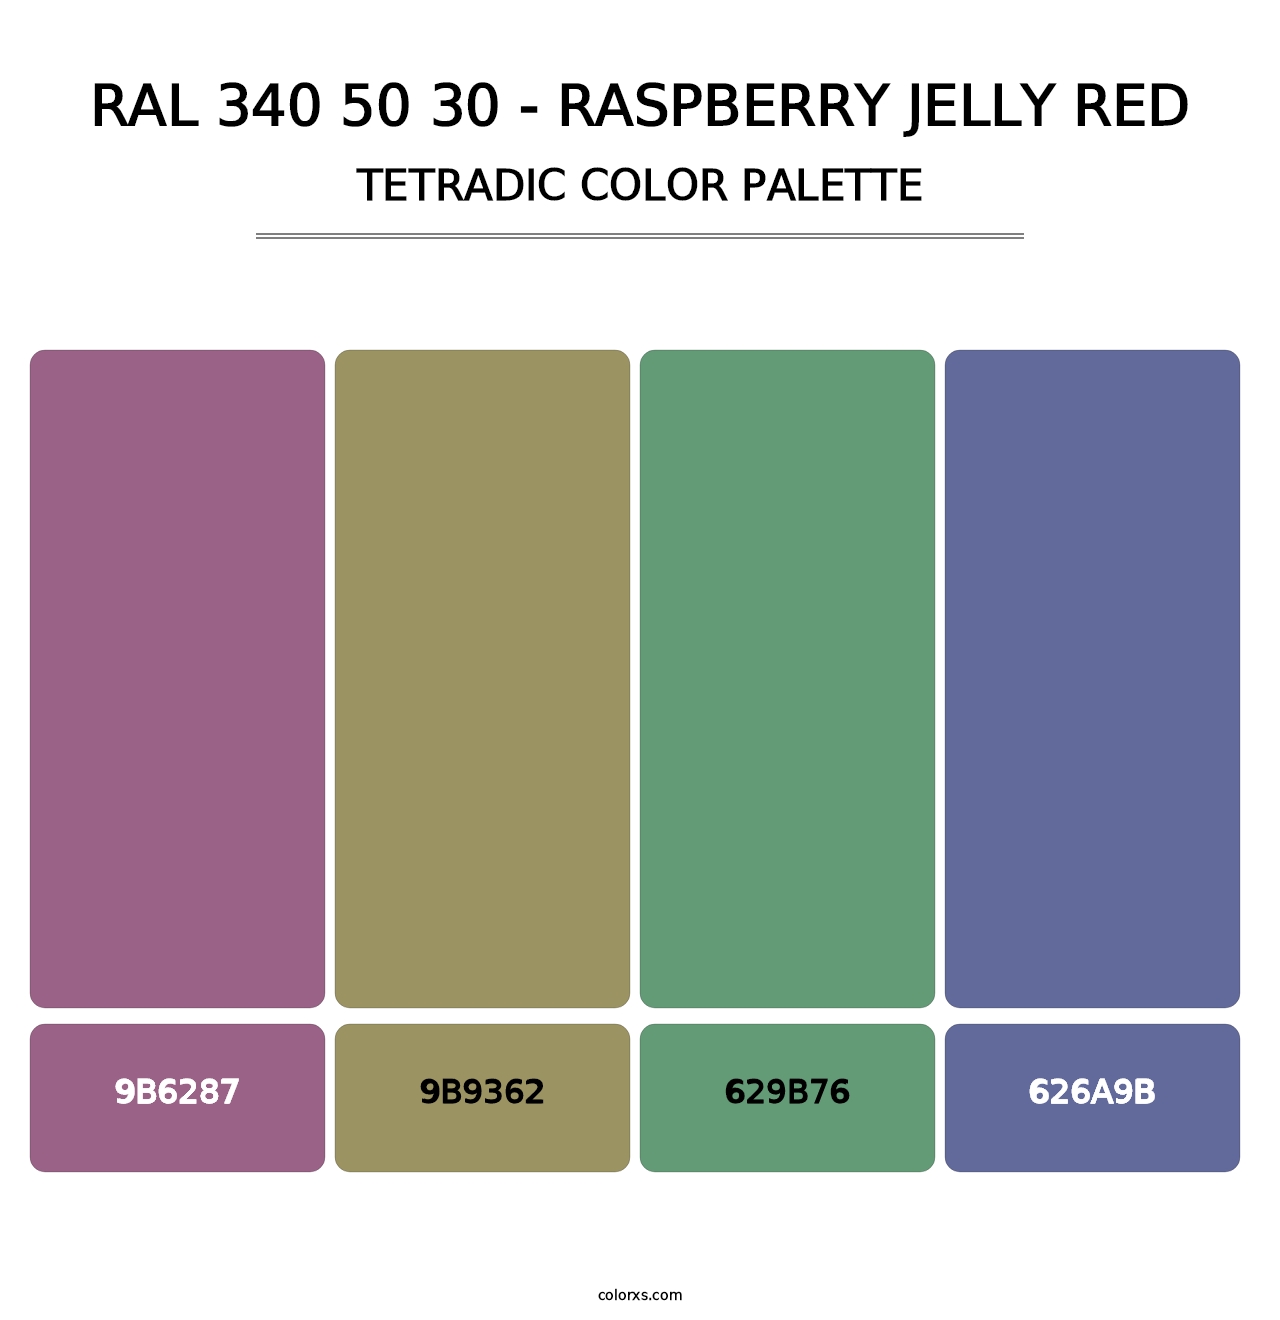 RAL 340 50 30 - Raspberry Jelly Red - Tetradic Color Palette